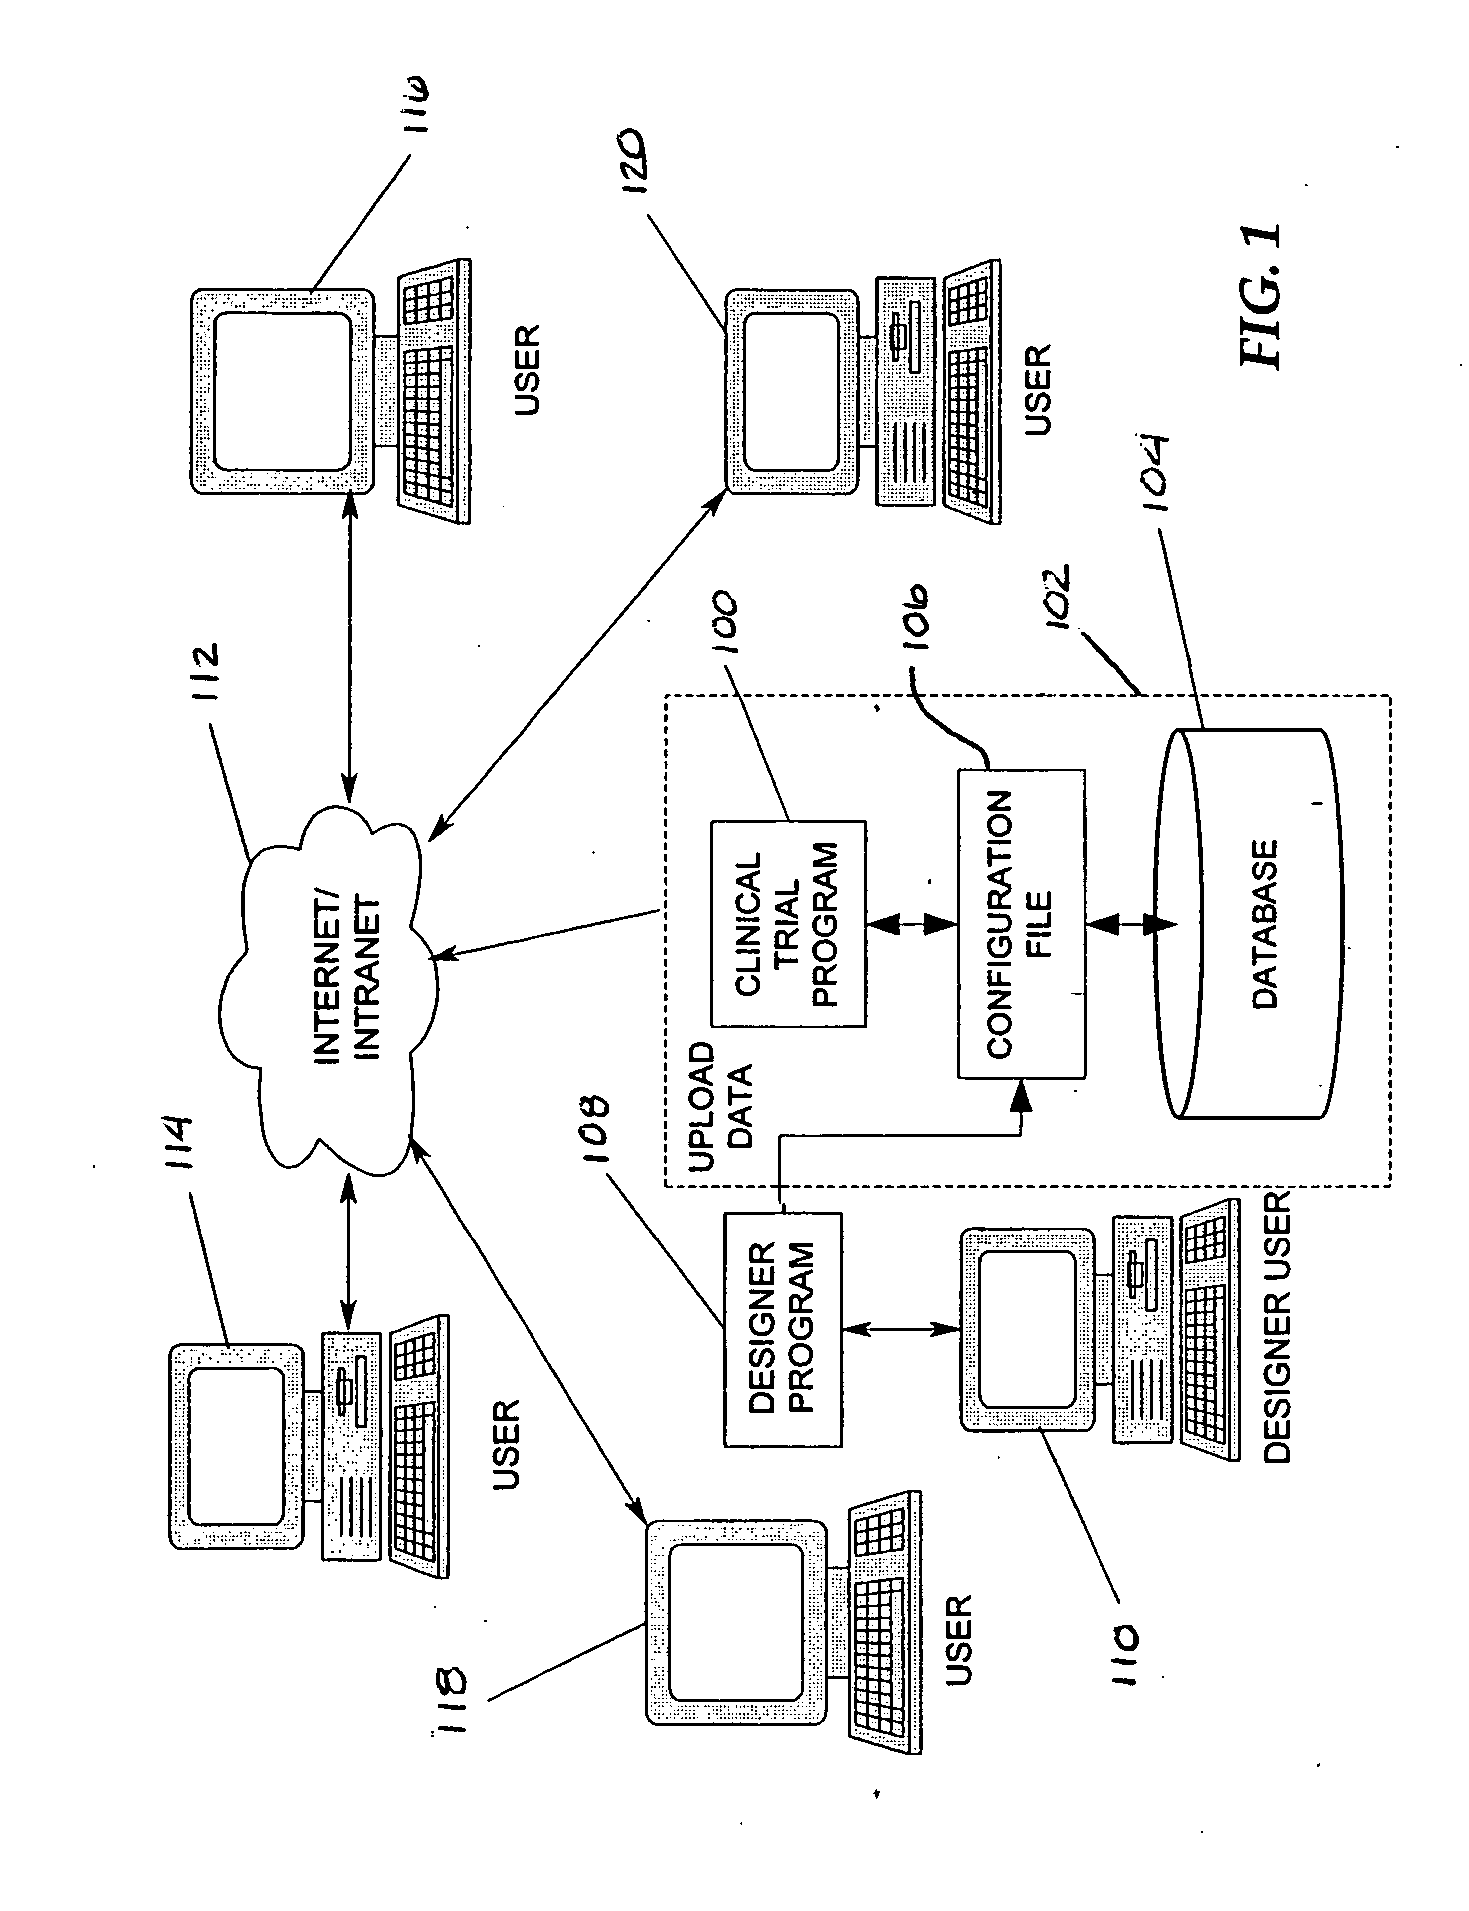 System and method for configuring electronic data capture and data management systems for clinical trials